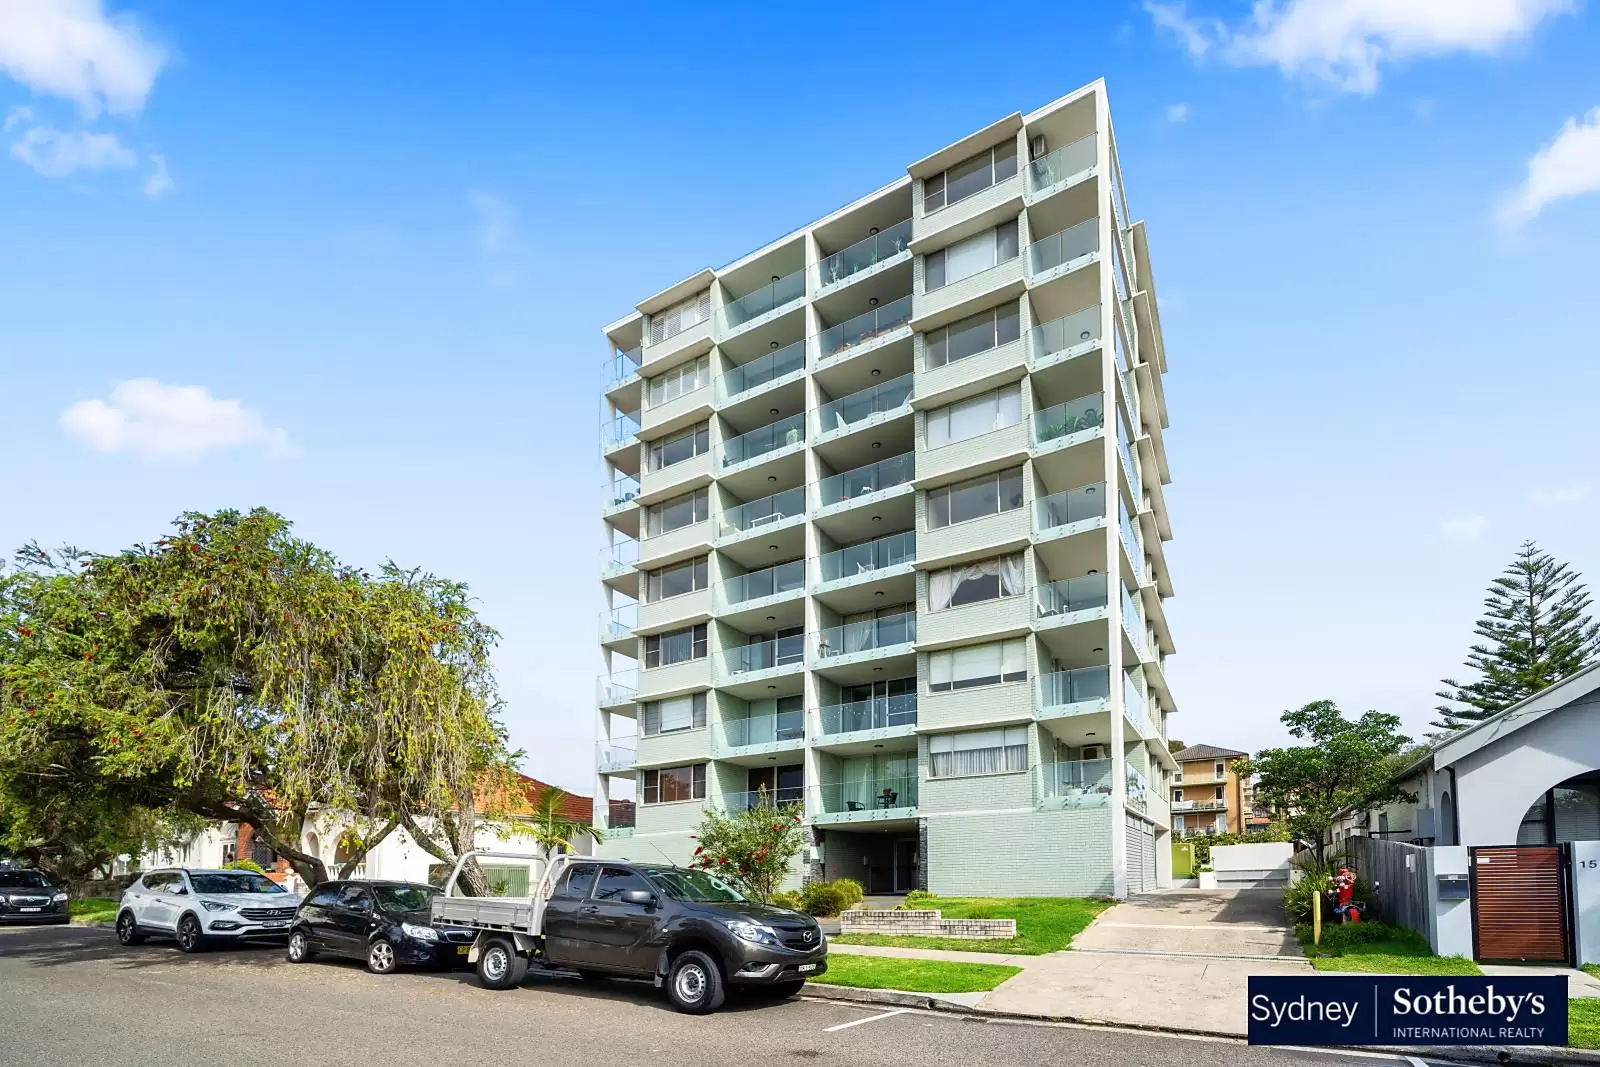 19/17-19 Gowrie Avenue, Bondi Junction Leased by Sydney Sotheby's International Realty - image 6